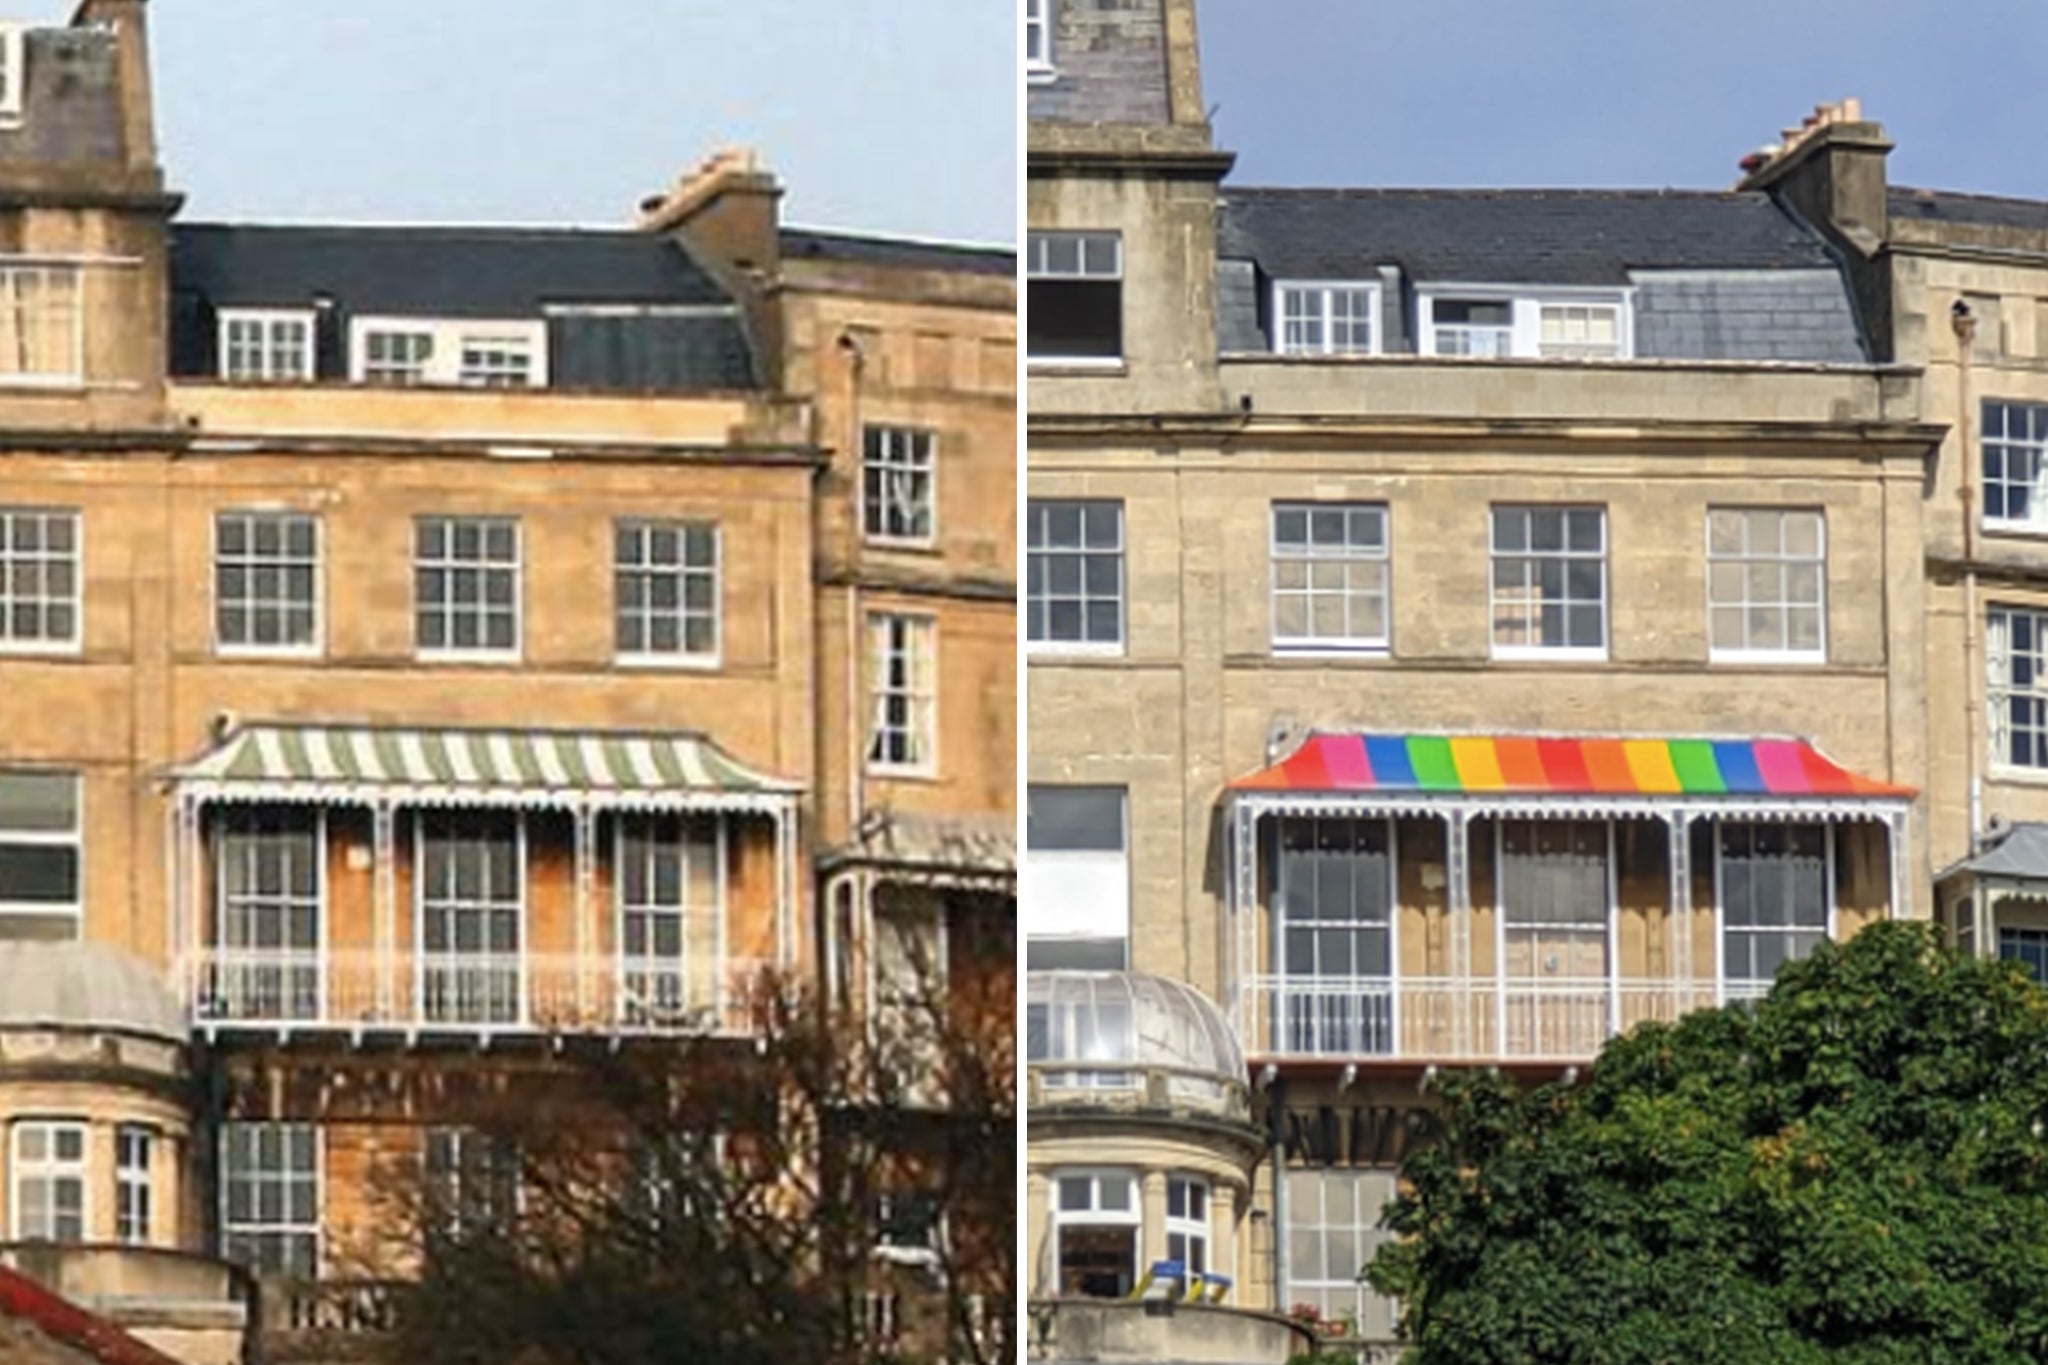 How the rainbow canopy looked before and after it was painted by Ken Aylmer, who is now returning it to its original design